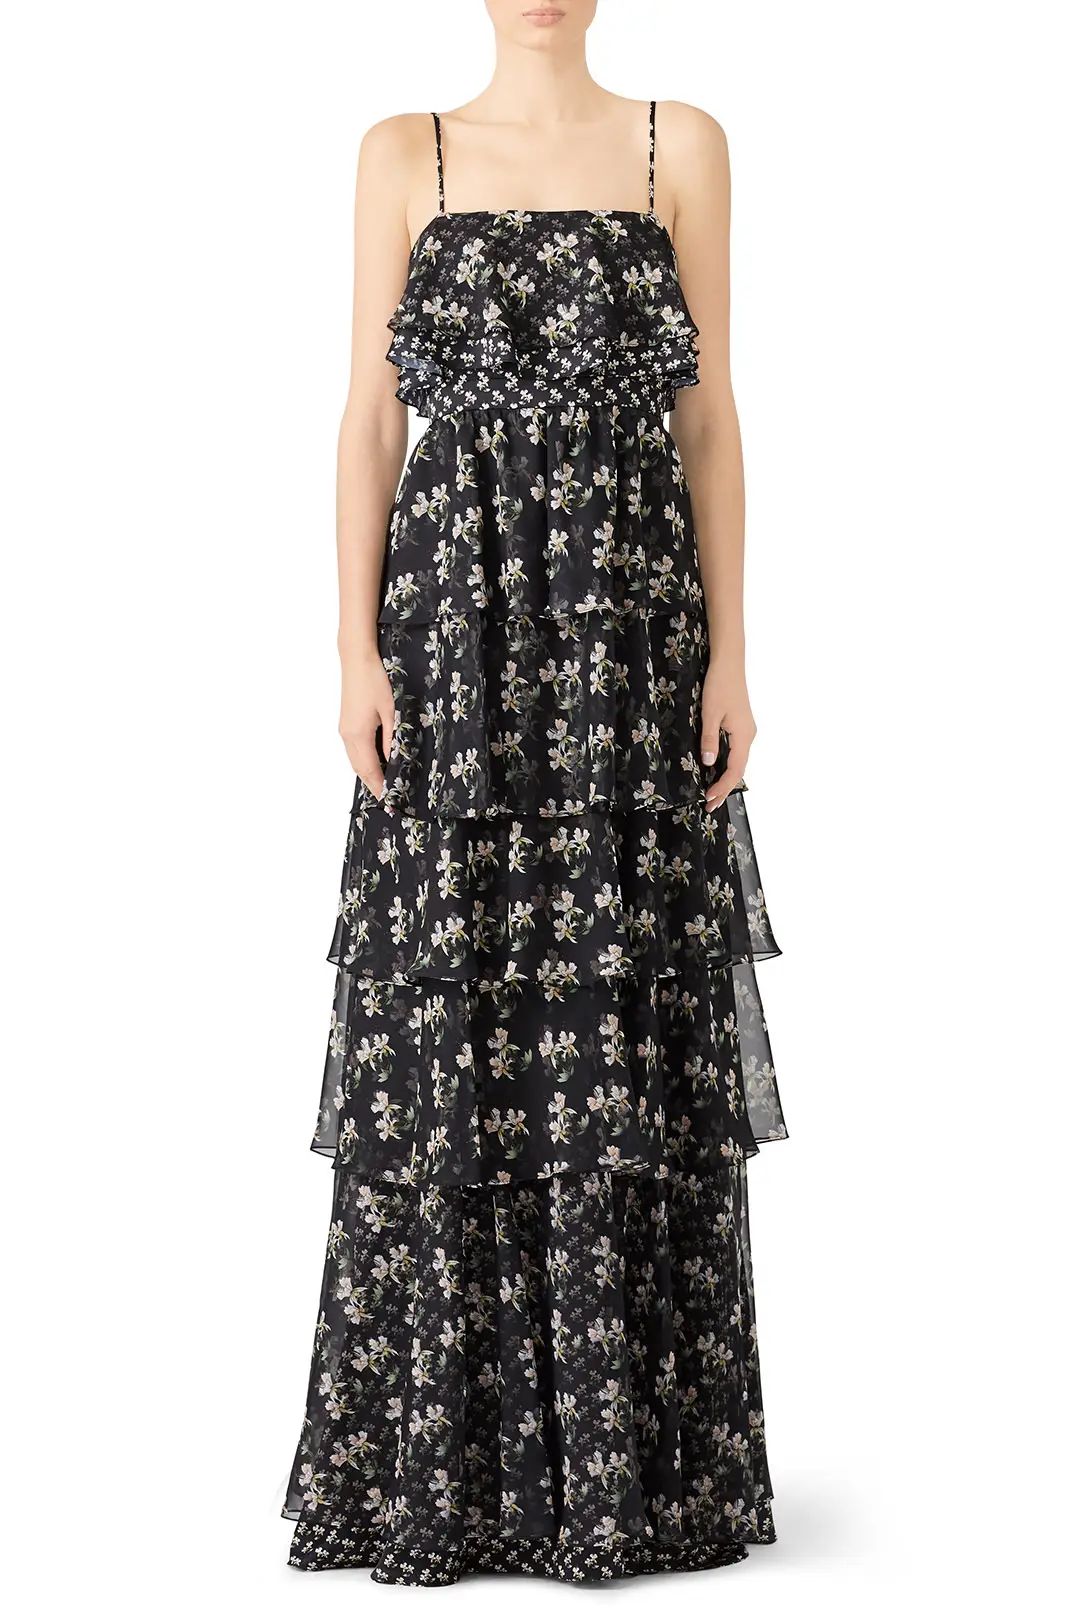 Floral Kiera Ruffle Gown | Rent the Runway